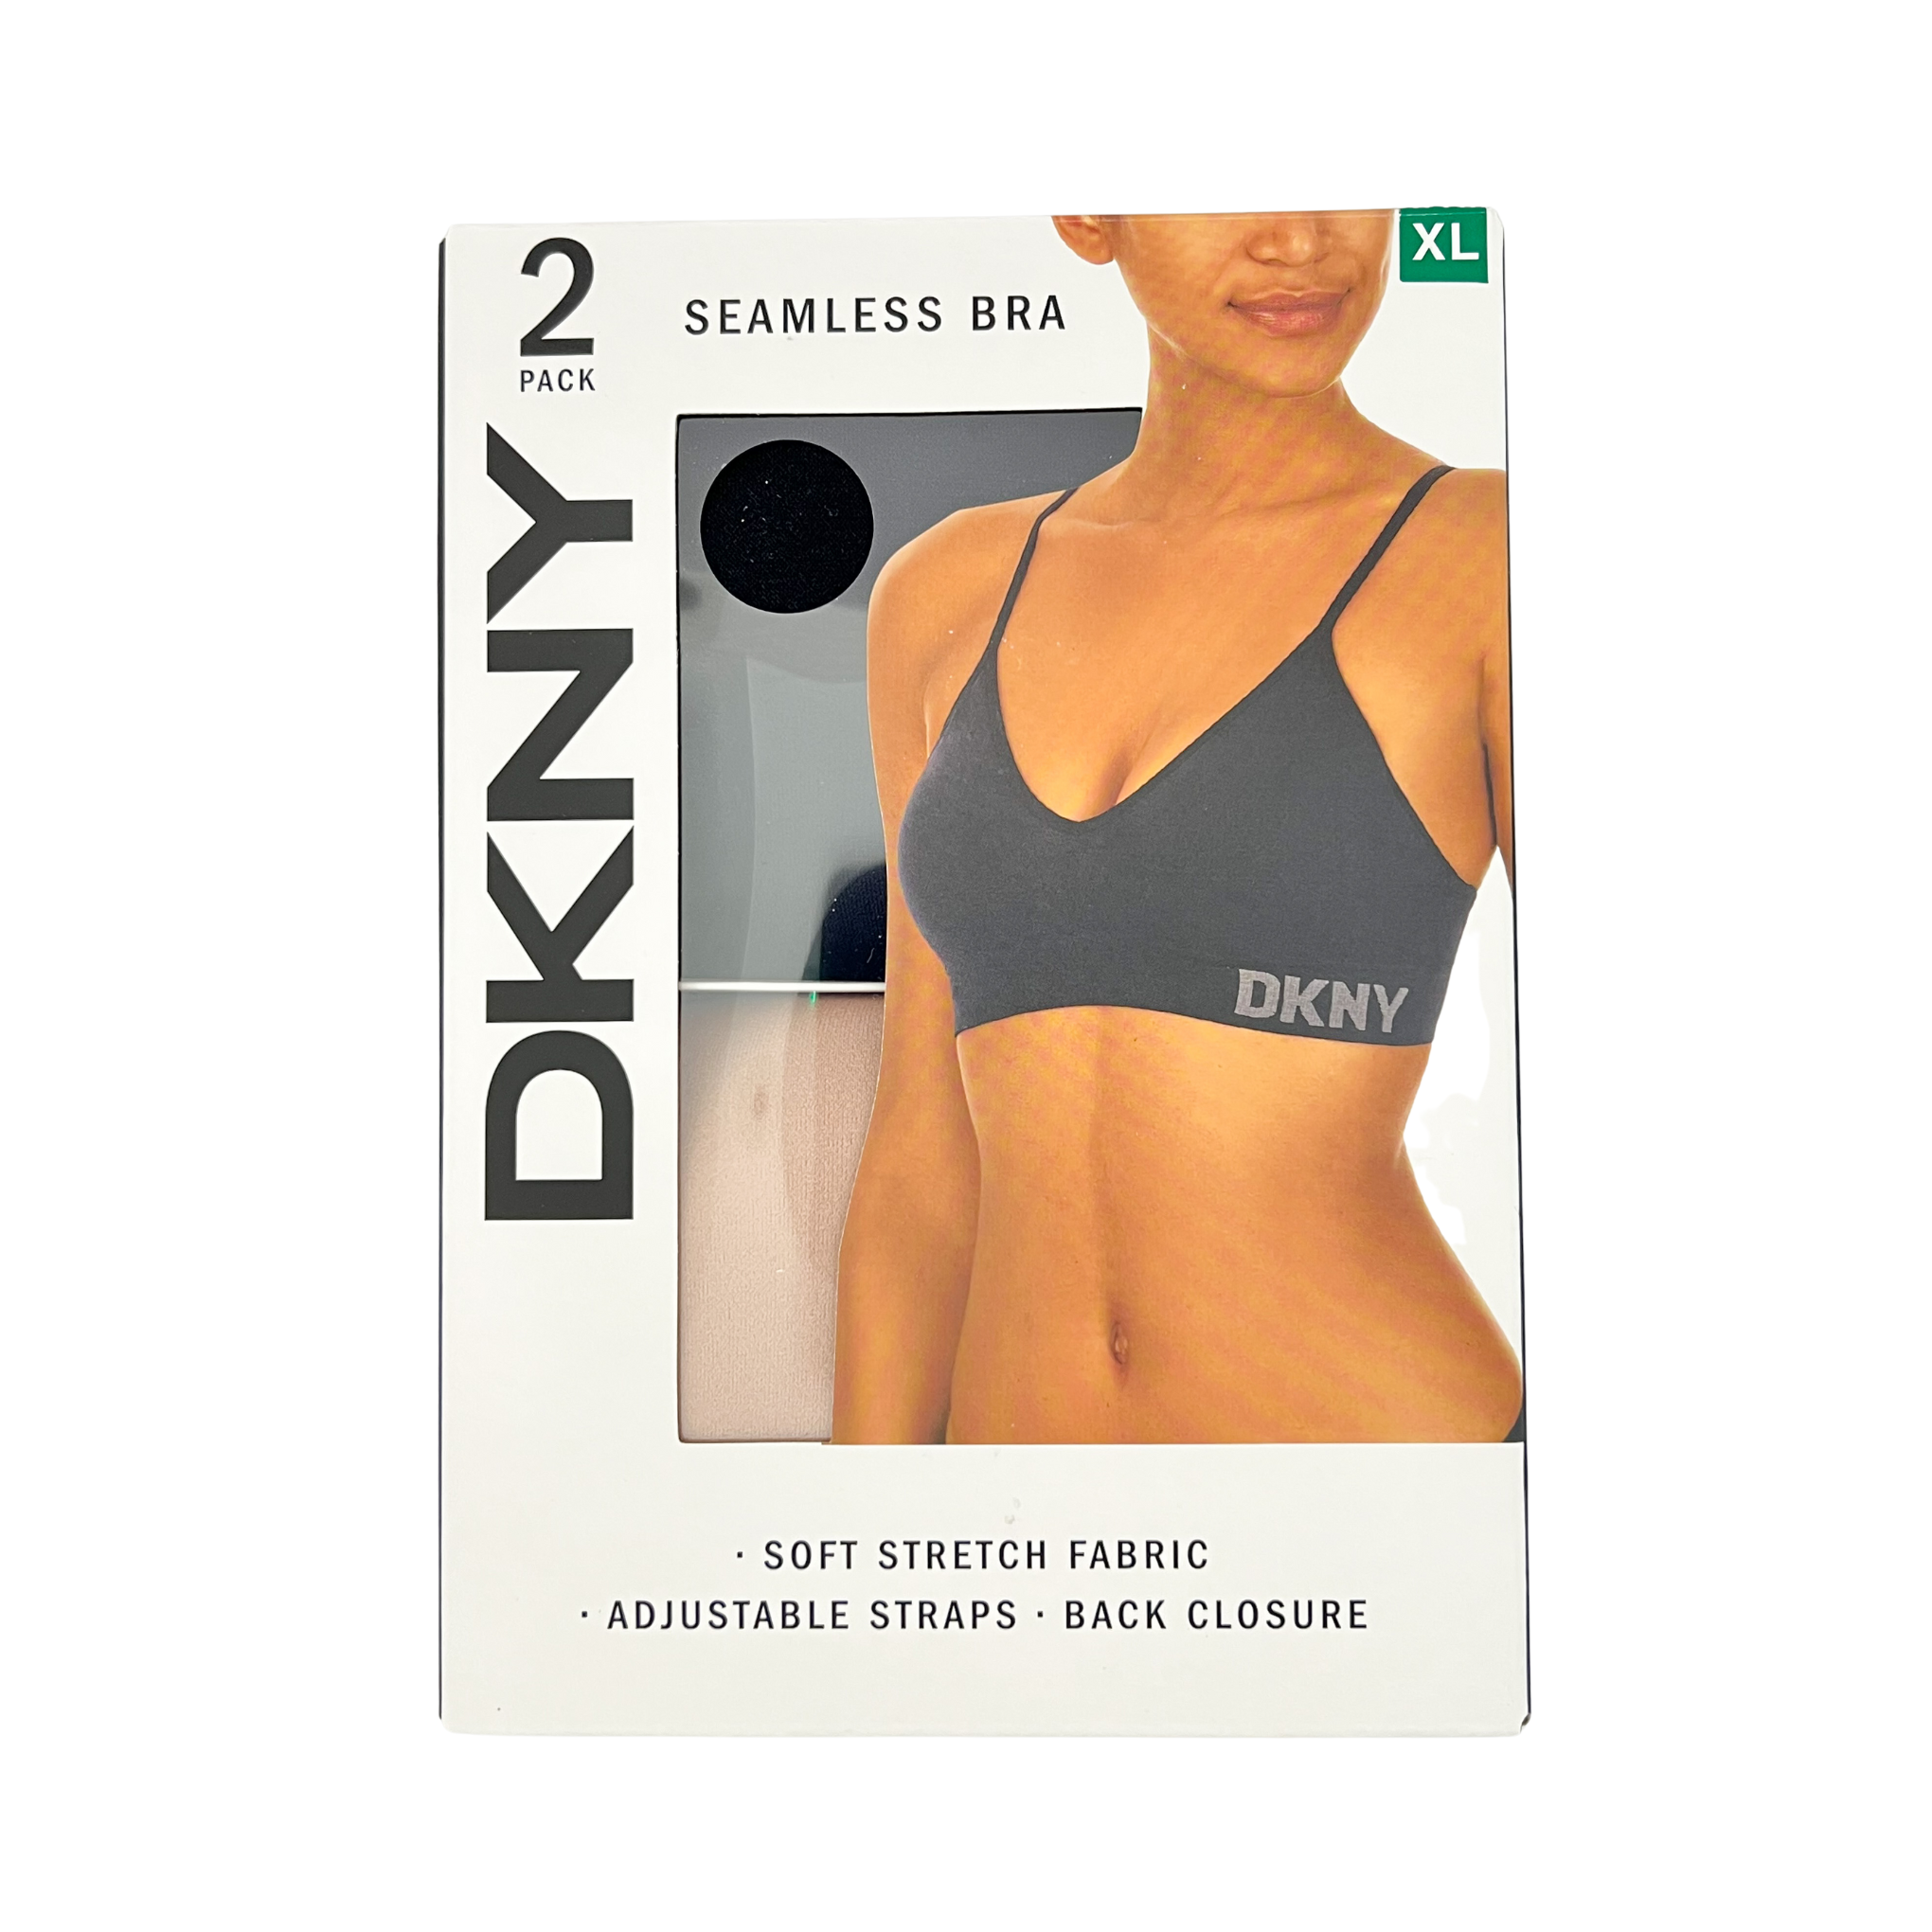 DKNY Ladies' Seamless Bralette with Adjustable Strap 2-Pack, White/Sand XL  